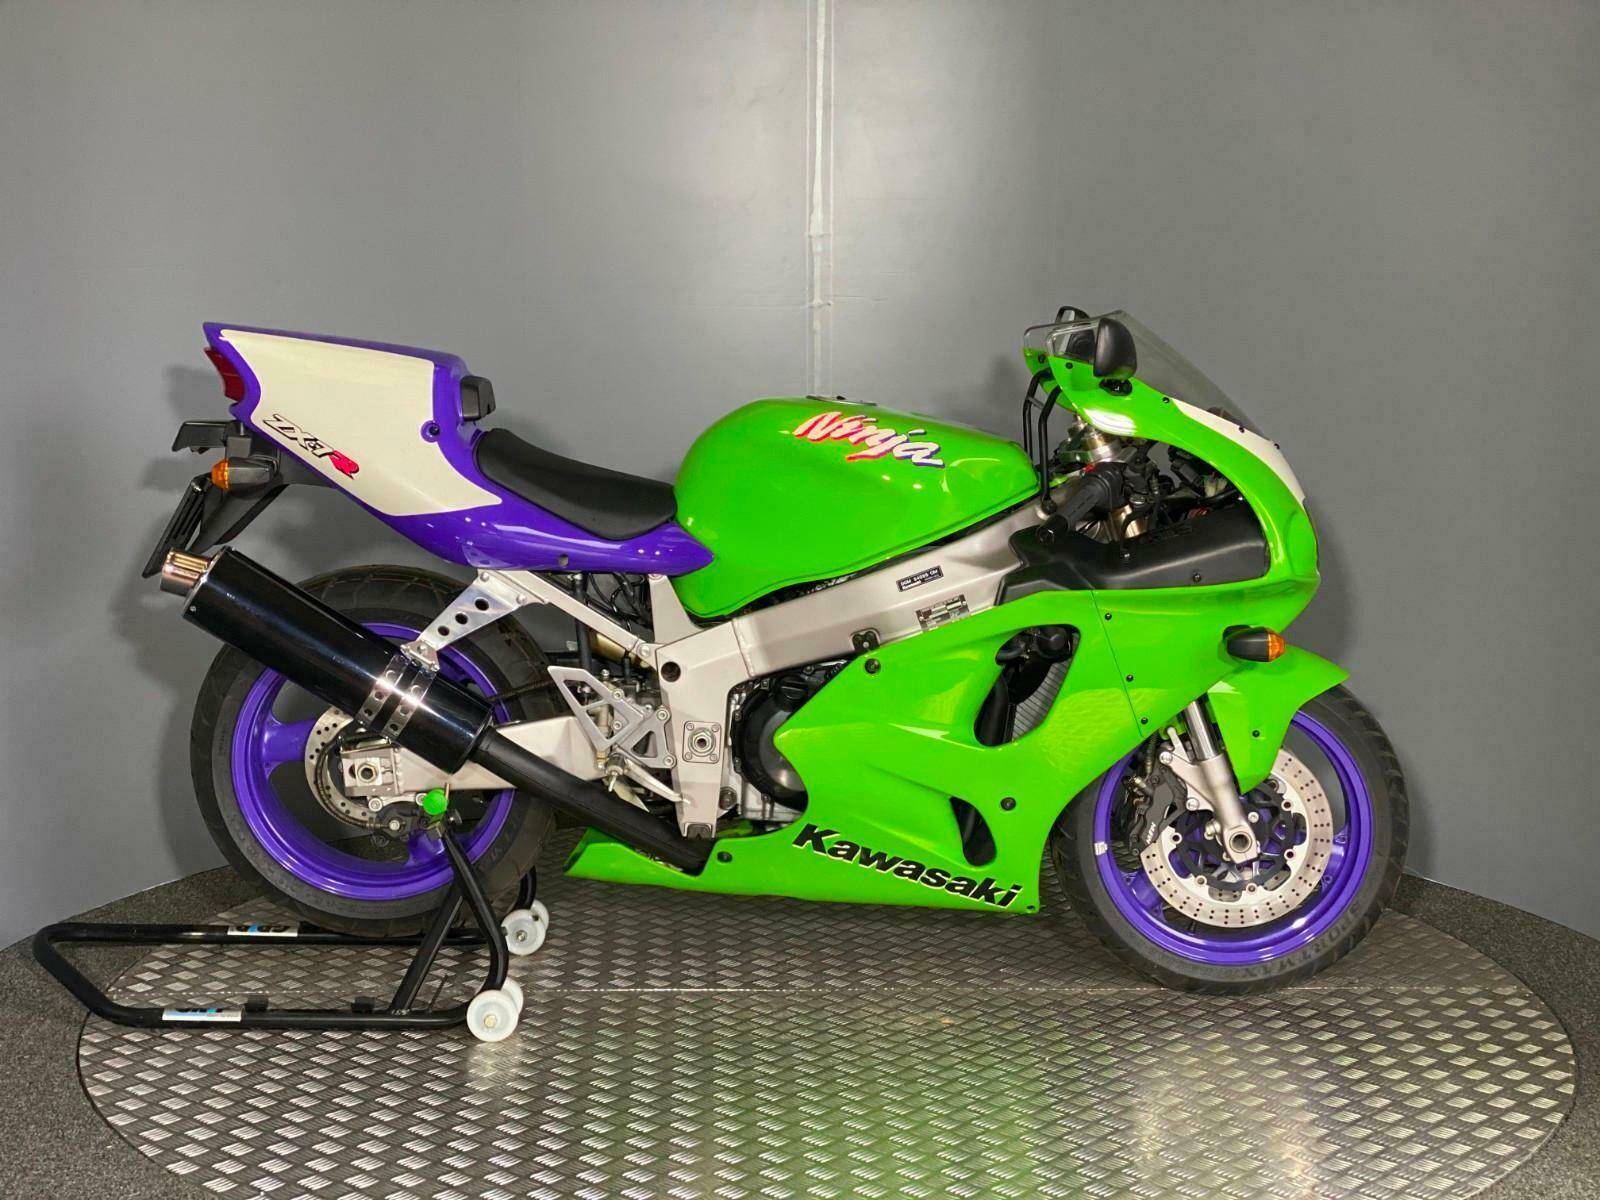 Udsøgt program klik 10 Things You Need To Know Before Buying A Kawasaki ZX-7R